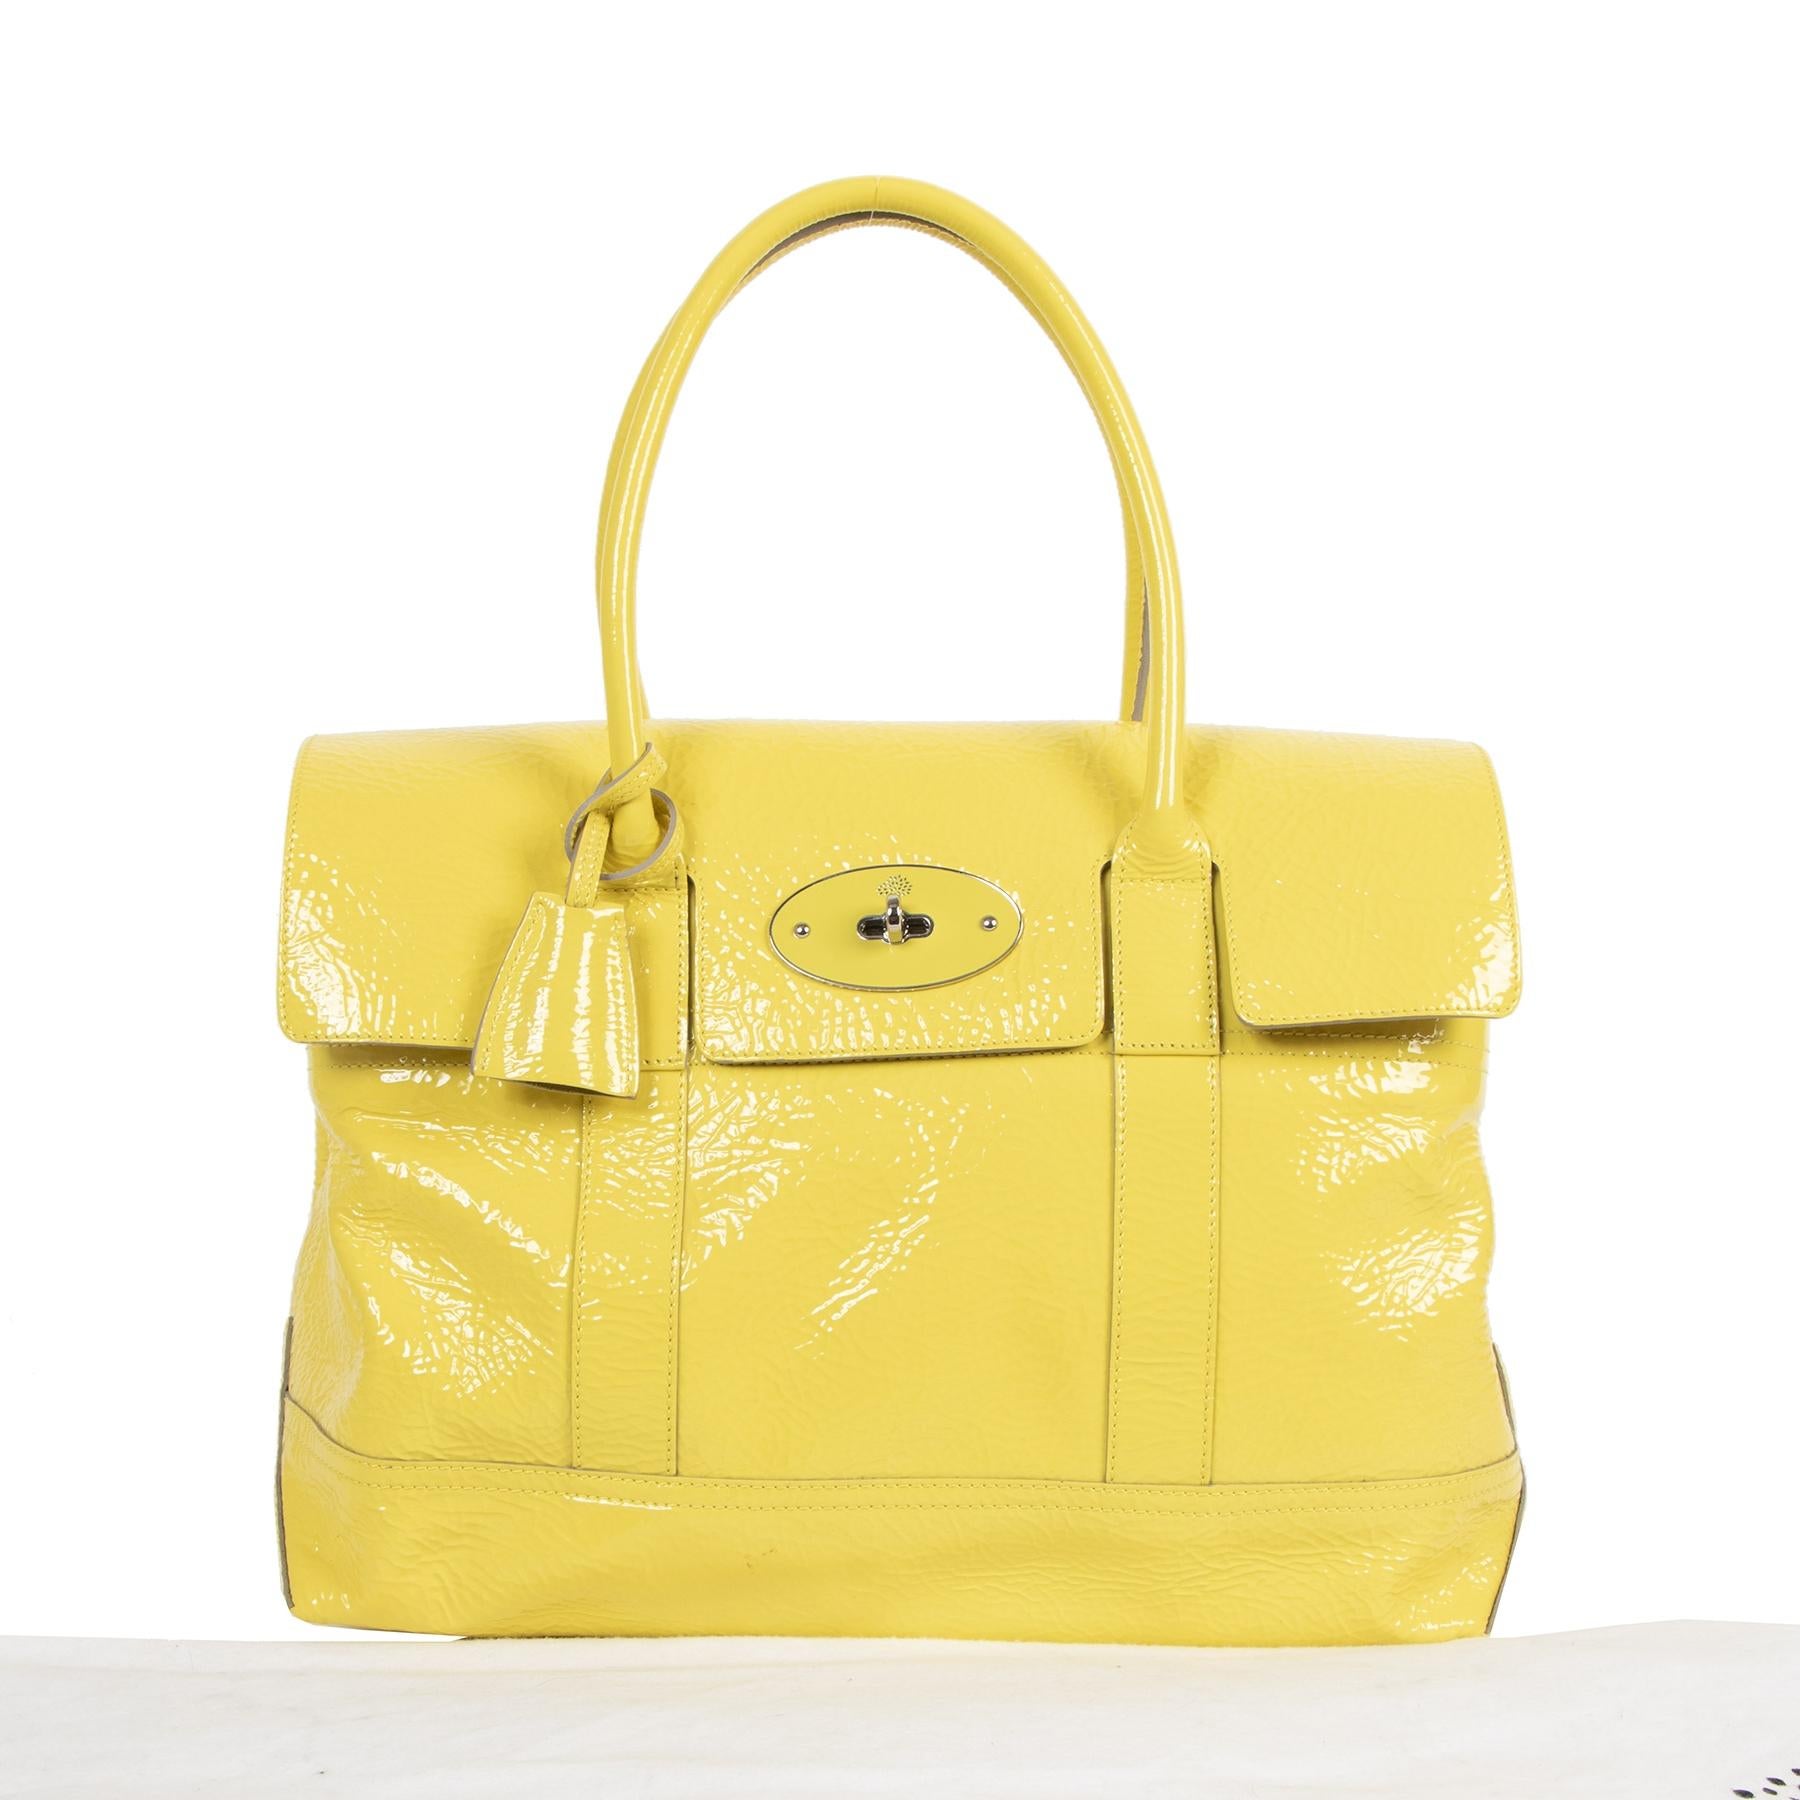 Very good preloved condition

Mulberry Lemon Yellow Bayswater Patent Leather Bag

Add a zesty yellow colour to your wardrobe with this lemon yellow Holiday Bayswater bag by Mulberry! it's crafted out of this bright yellow patent leather which has an